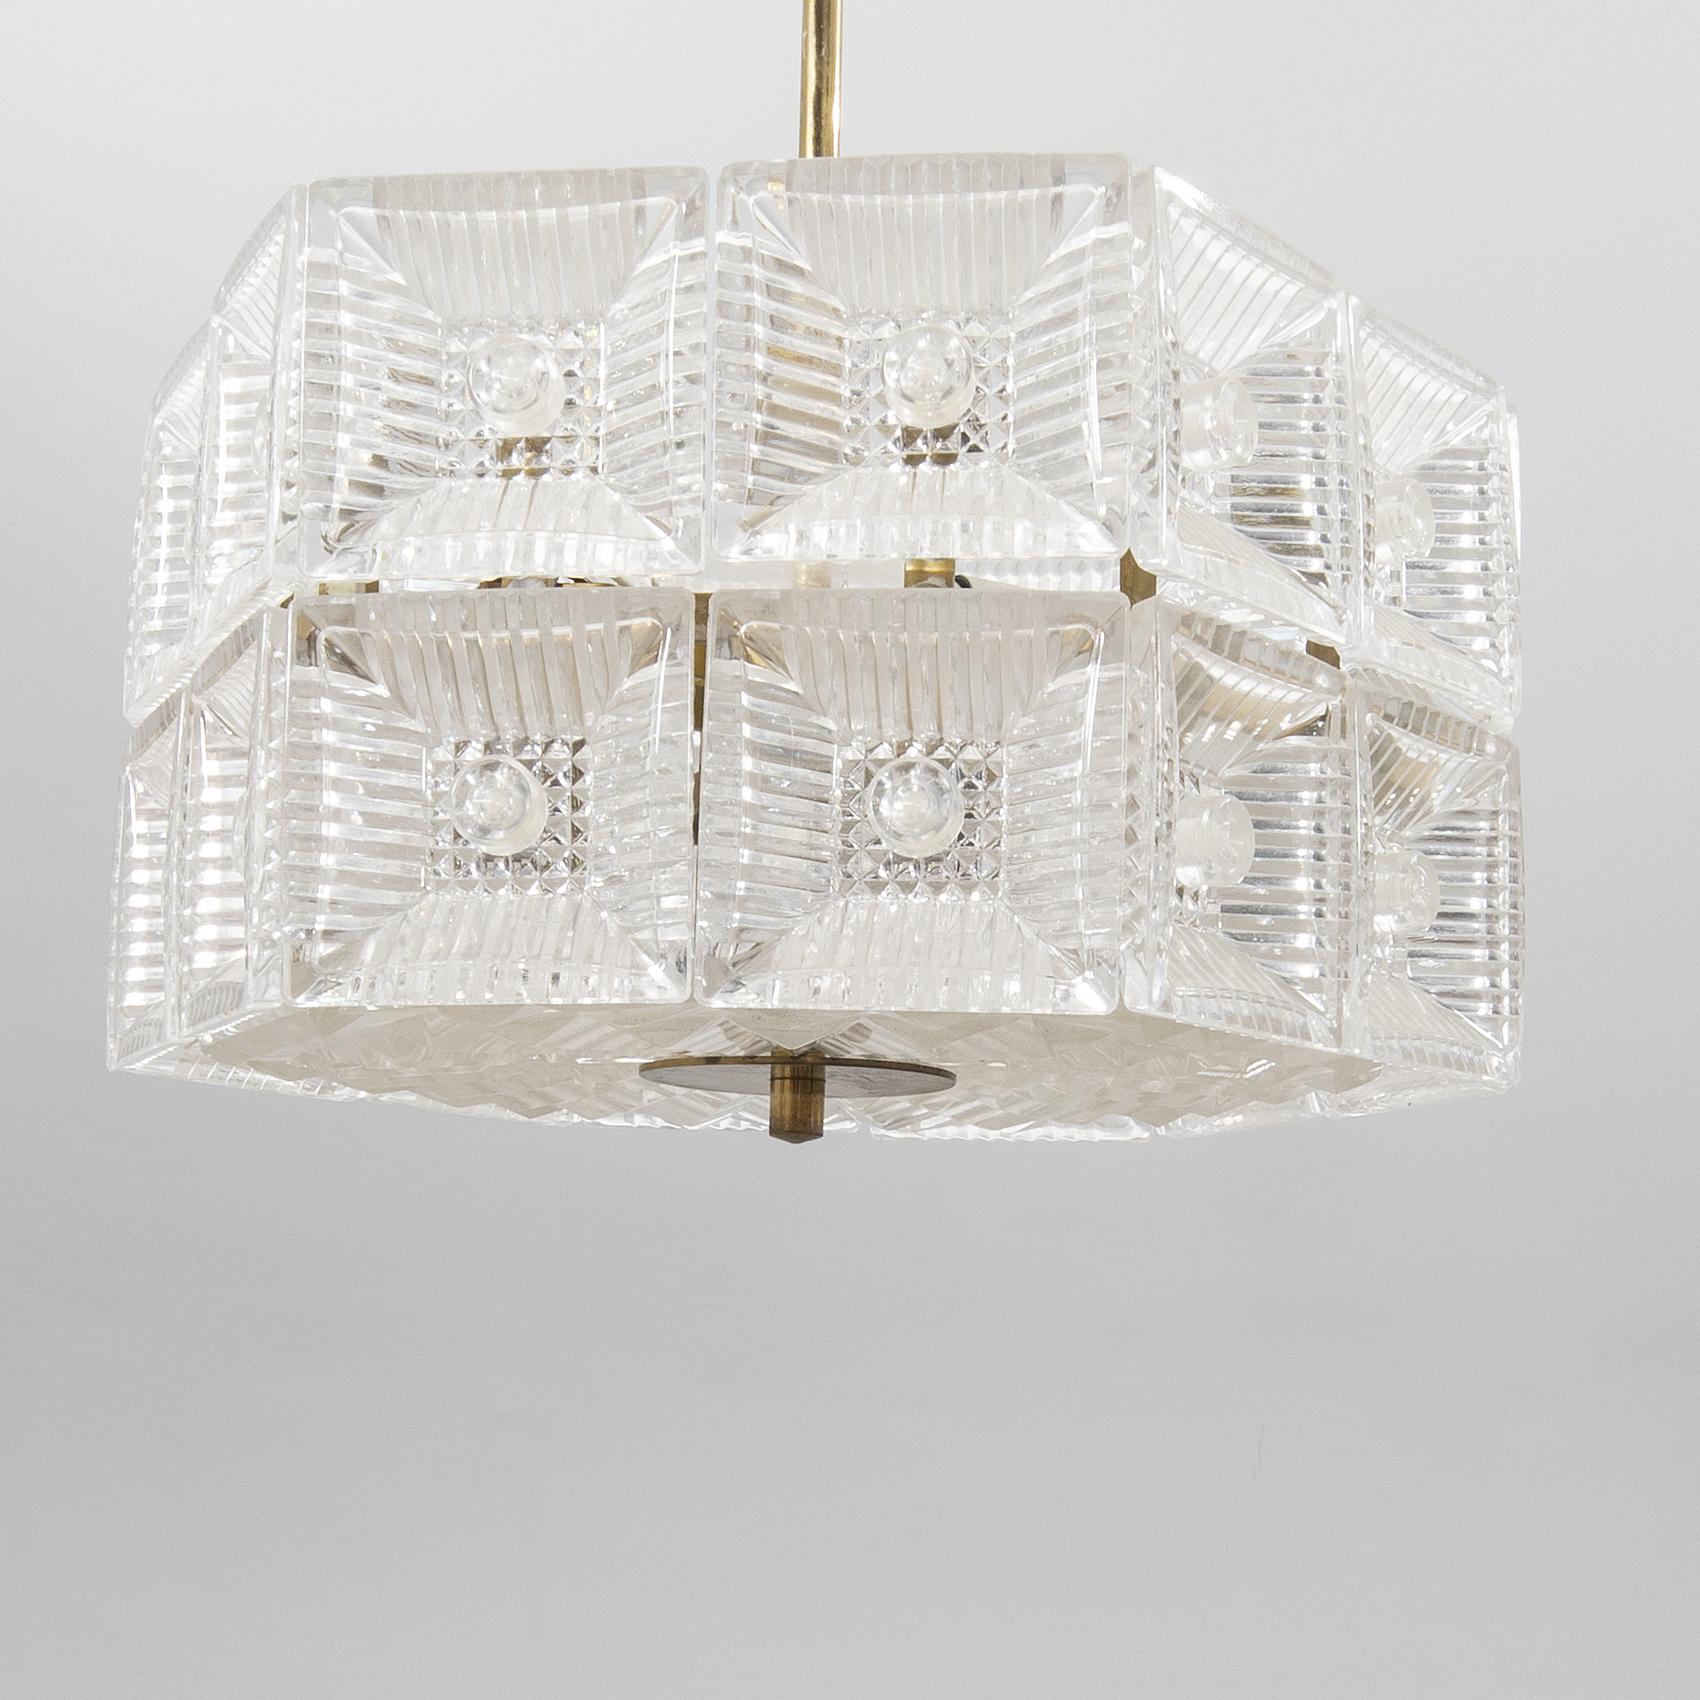 Mid-Century Modern Carl Fagerlund Crystal Glass and Brass Pendant Light for Orrefors, Sweden, 1960 For Sale